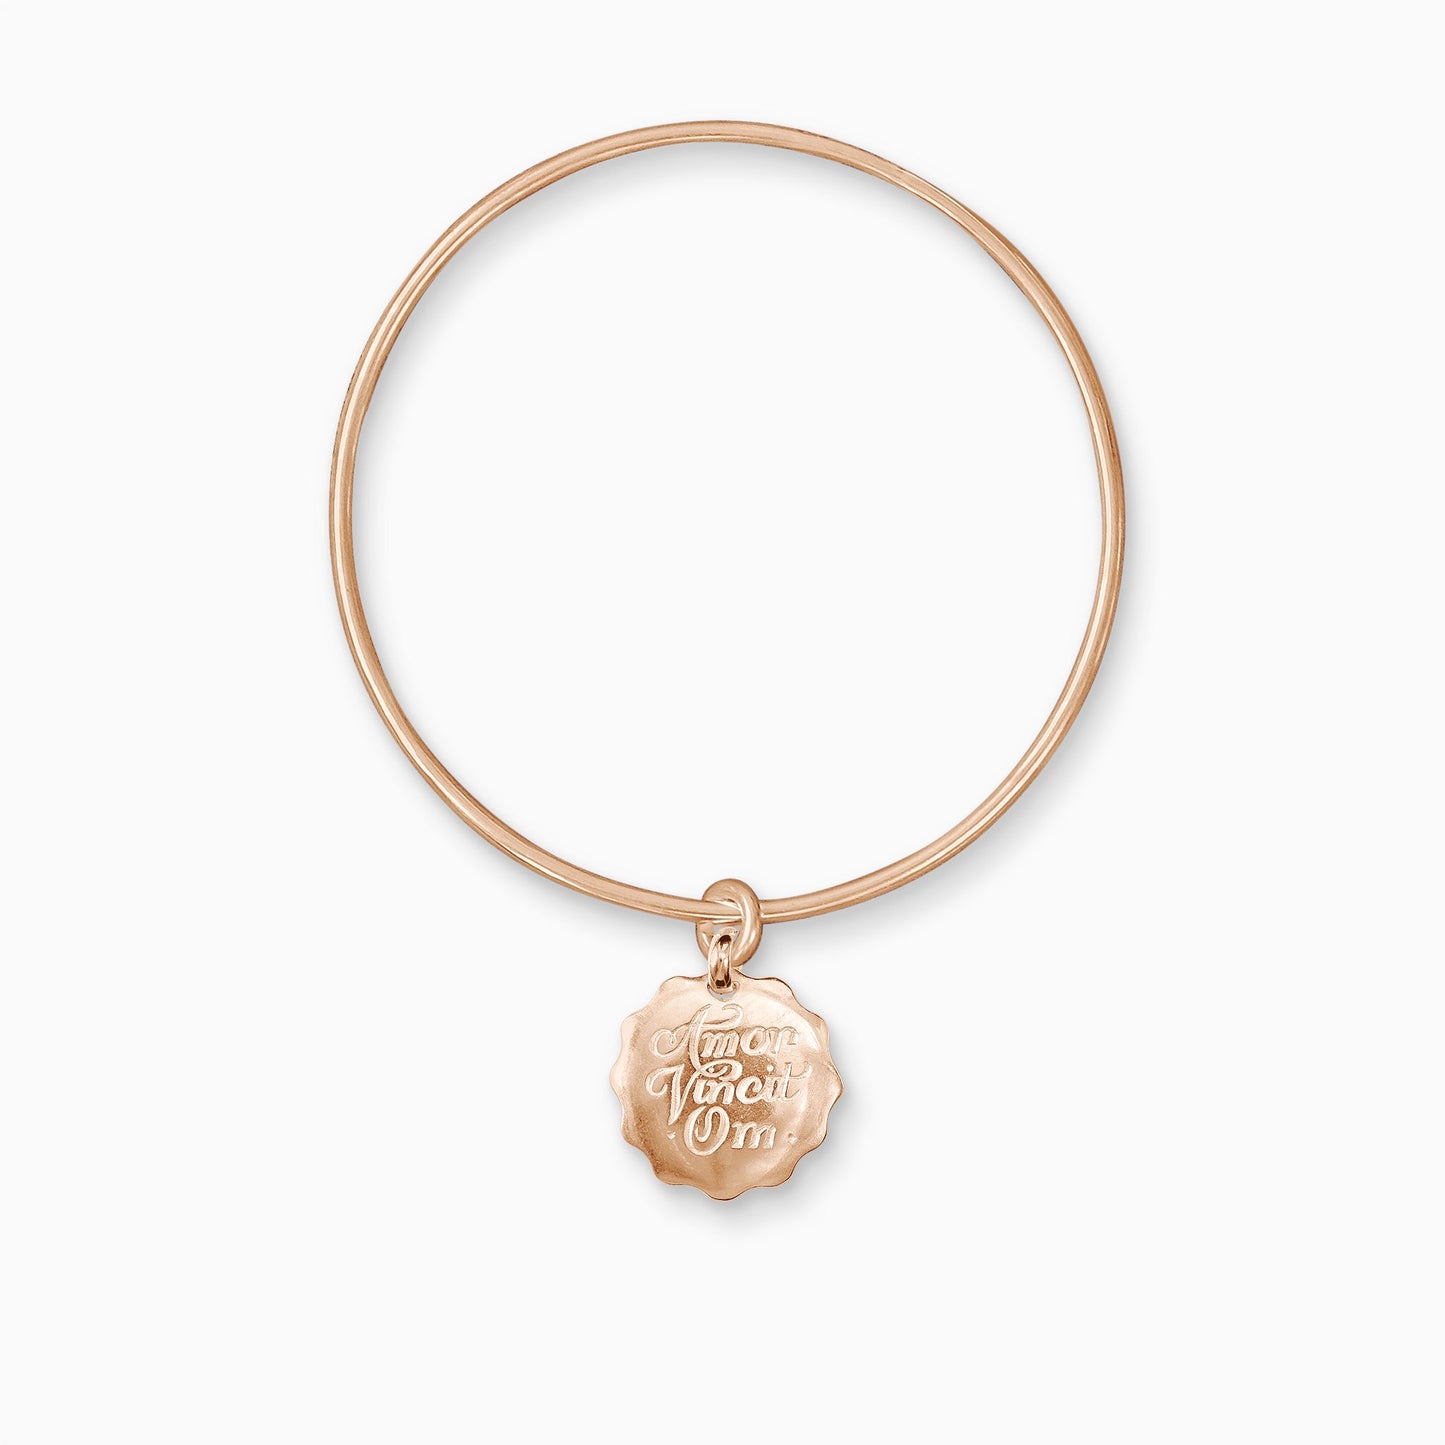 An 18ct Fairtrade rose gold round, smooth charm with a wavy edge engraved with ‘Love Conquers All’ in Latin, freely moving on a round wire bangle.  Charm 22mm. Bangle, 63mm inside diameter x 2mm round wire.